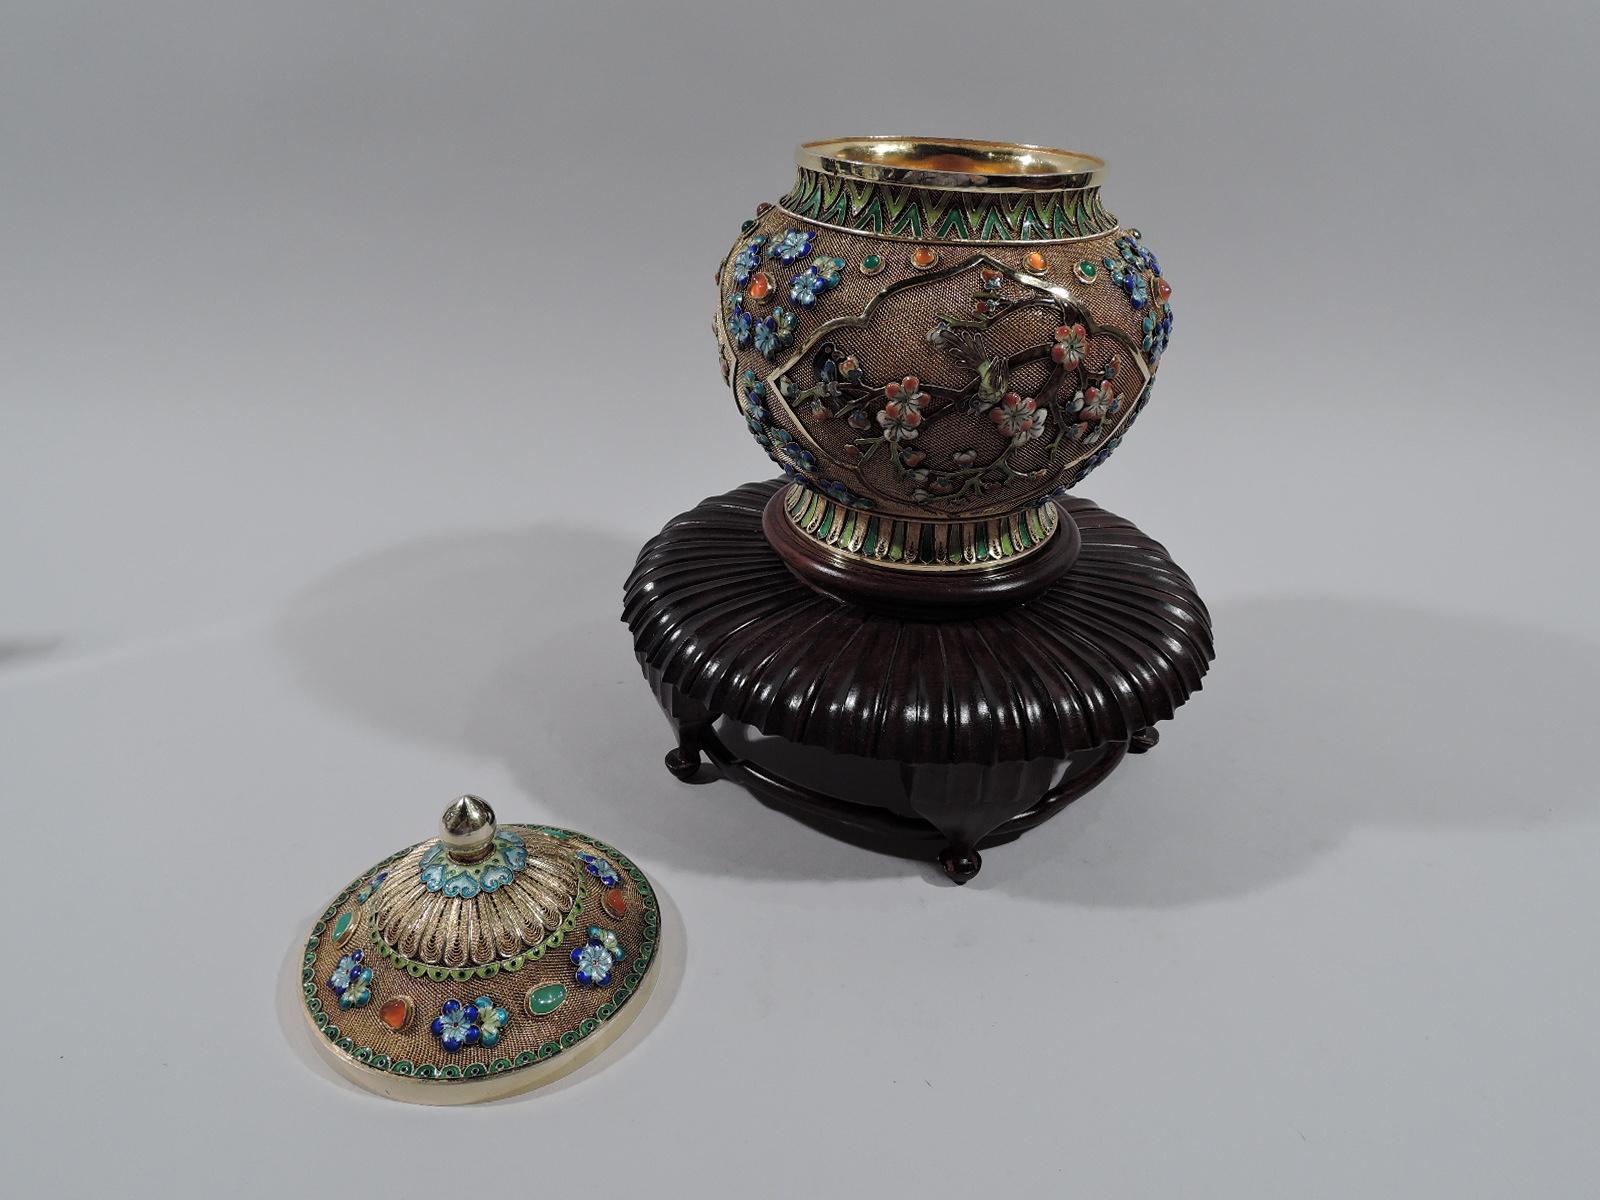 Fabulous Antique Chinese Silver Gilt and Enamel Covered Ginger Jar 1